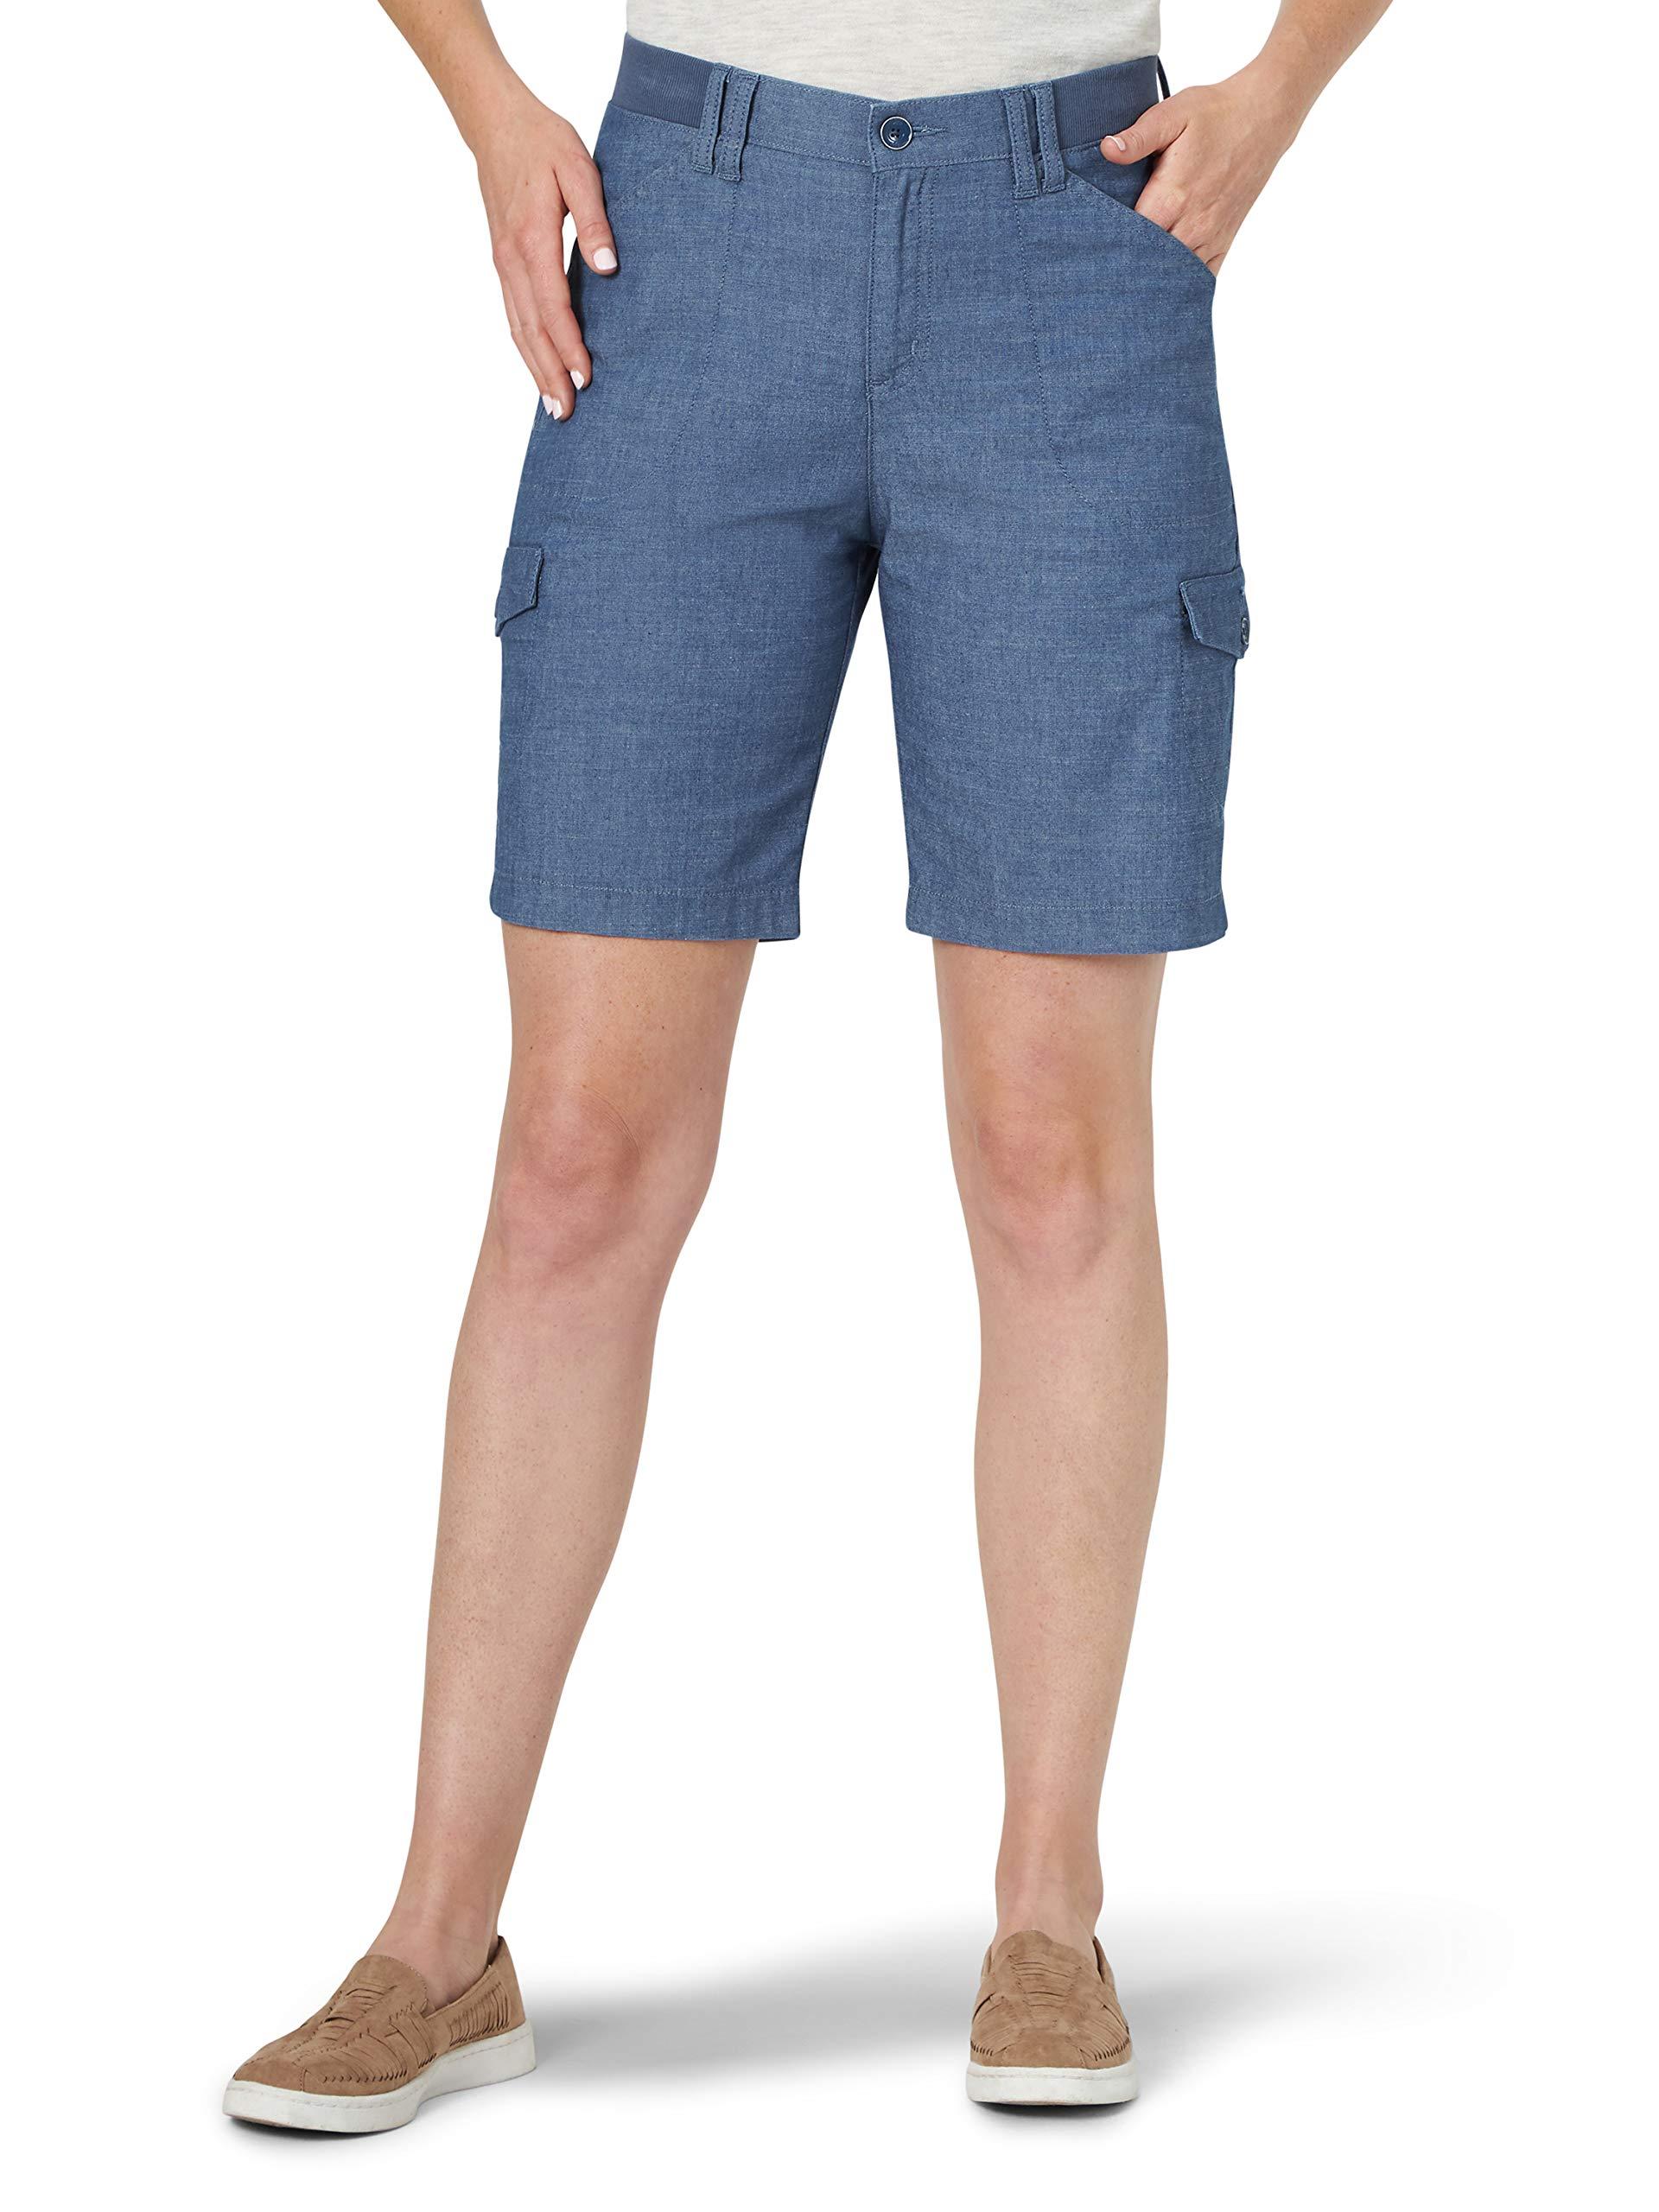 Lee Jeans Flex-to-go Cargo Bermuda Short in Rinse Chambray (Blue ...